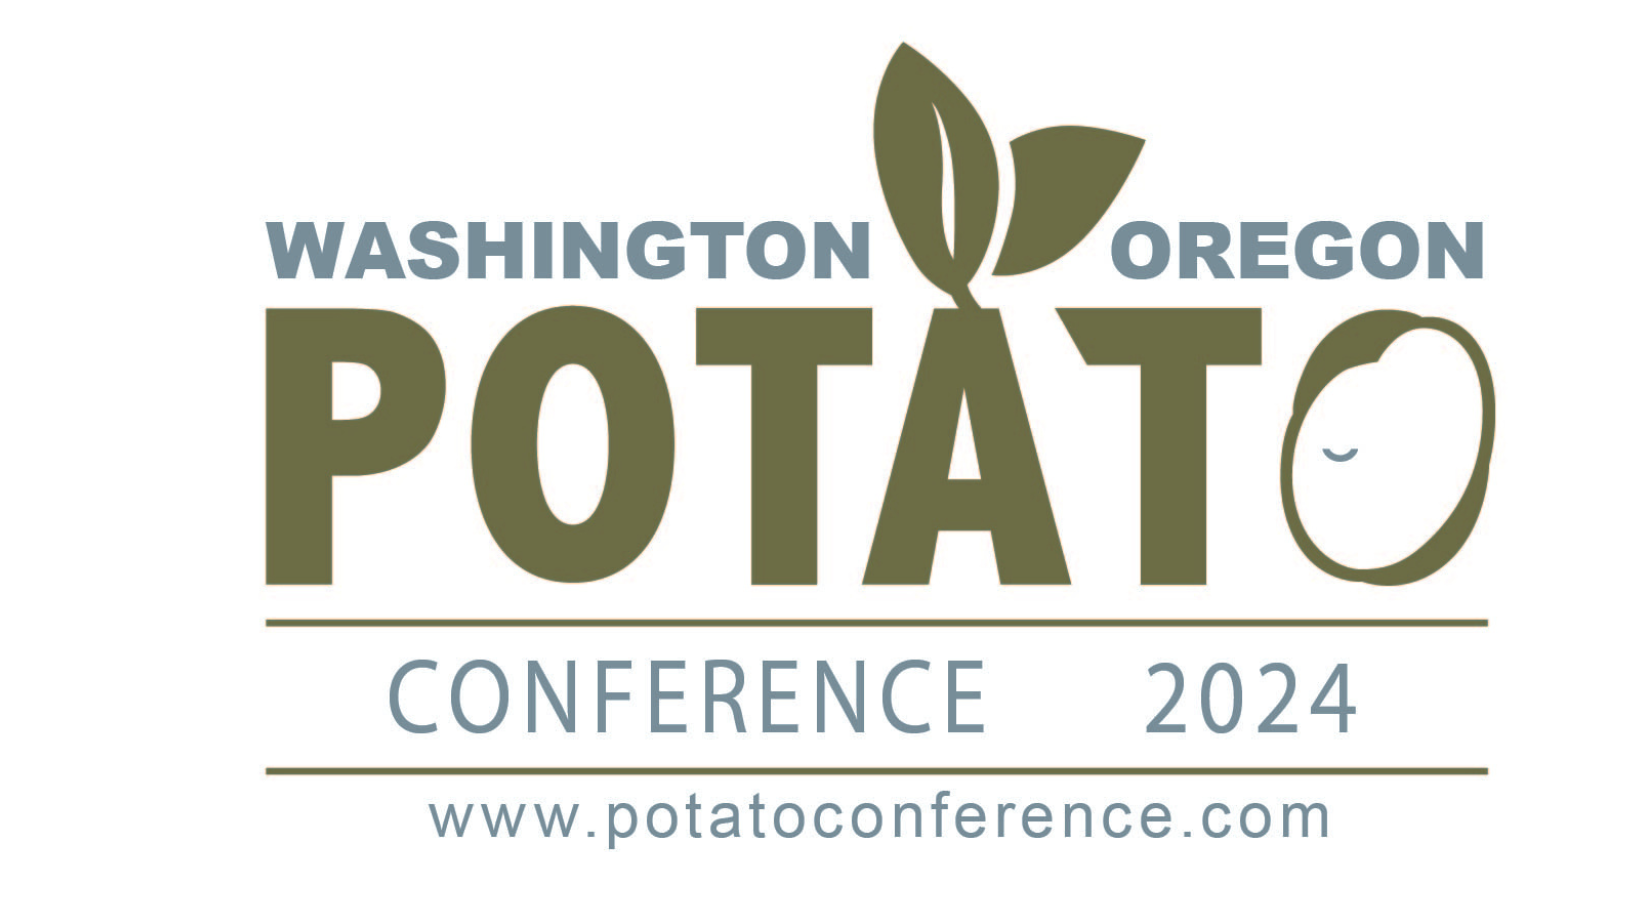 WA OR Conference Logo 2